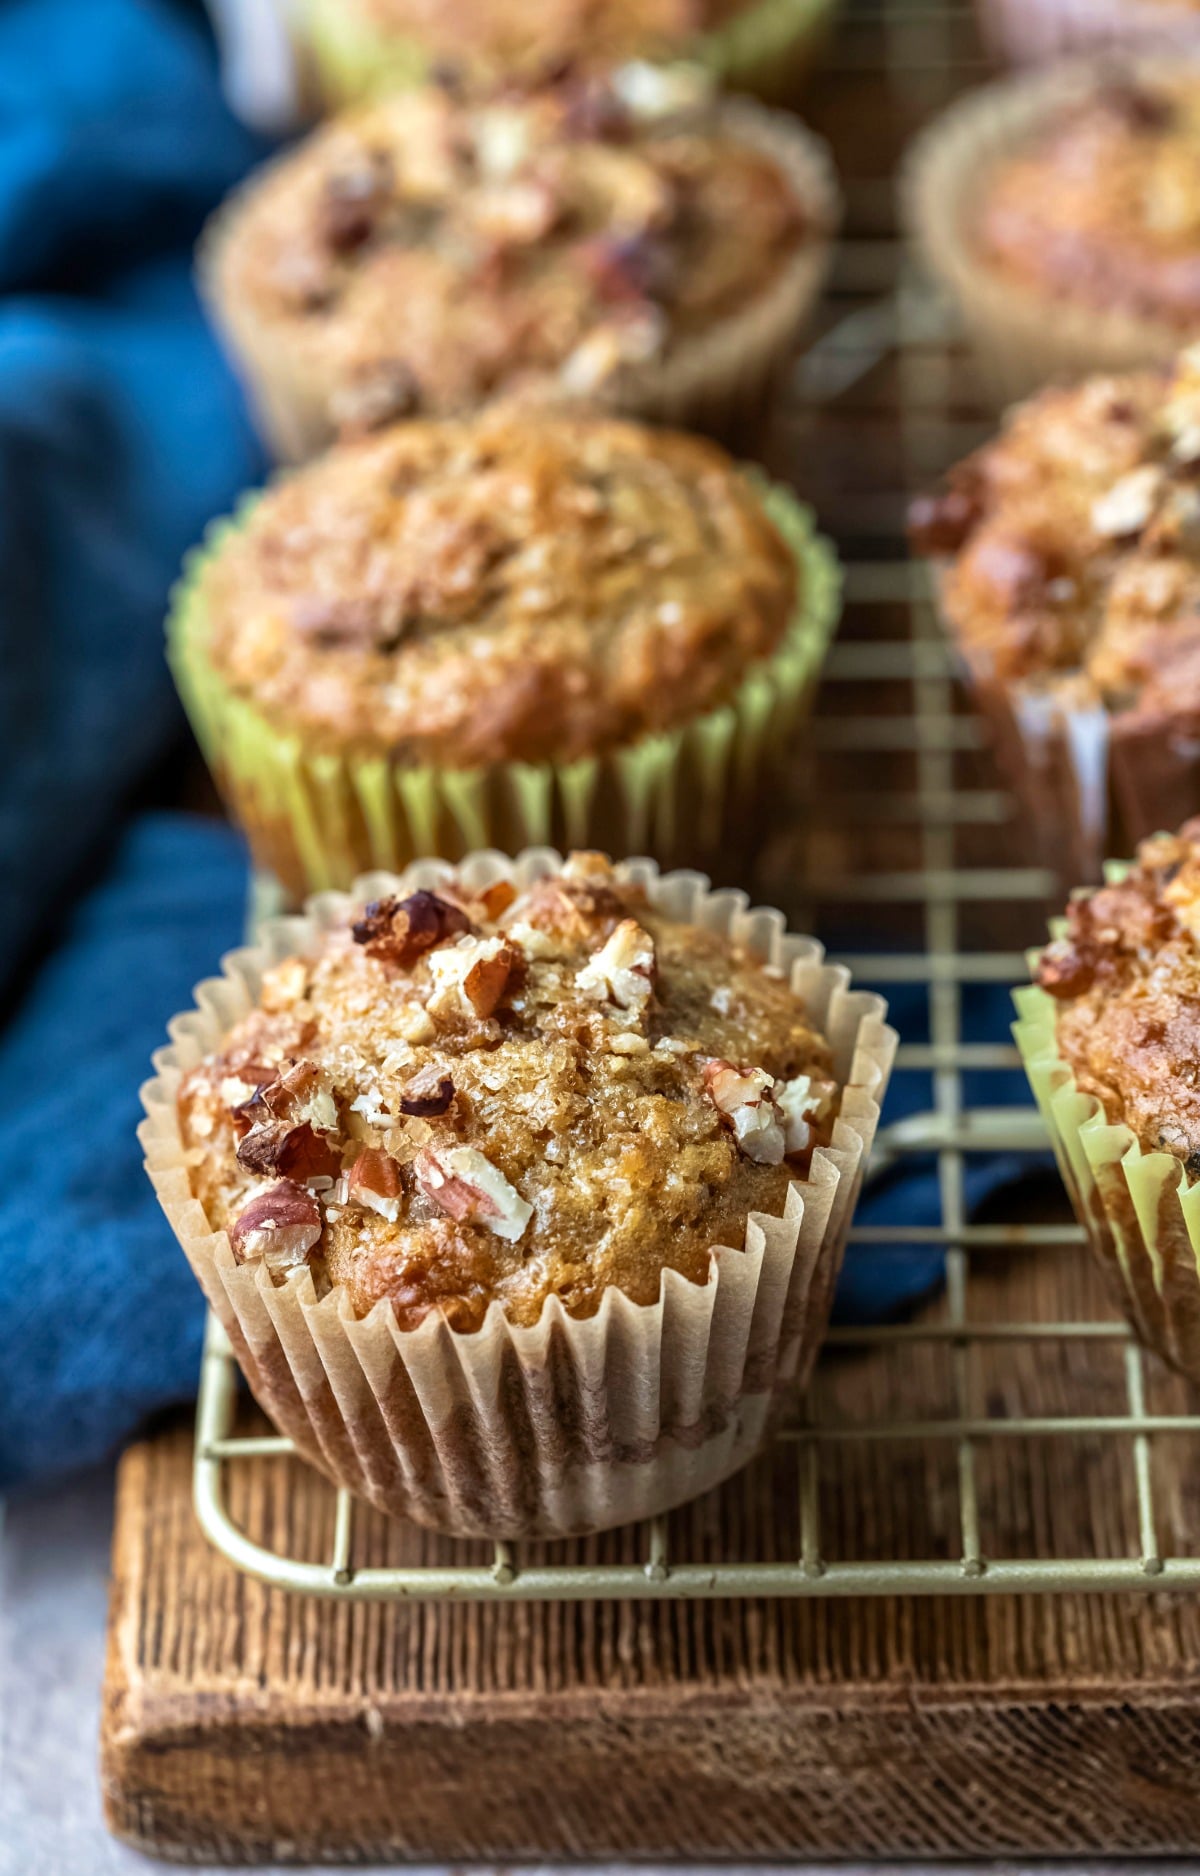 Oatmeal raisin bran muffin topped with chopped pecans and sugar